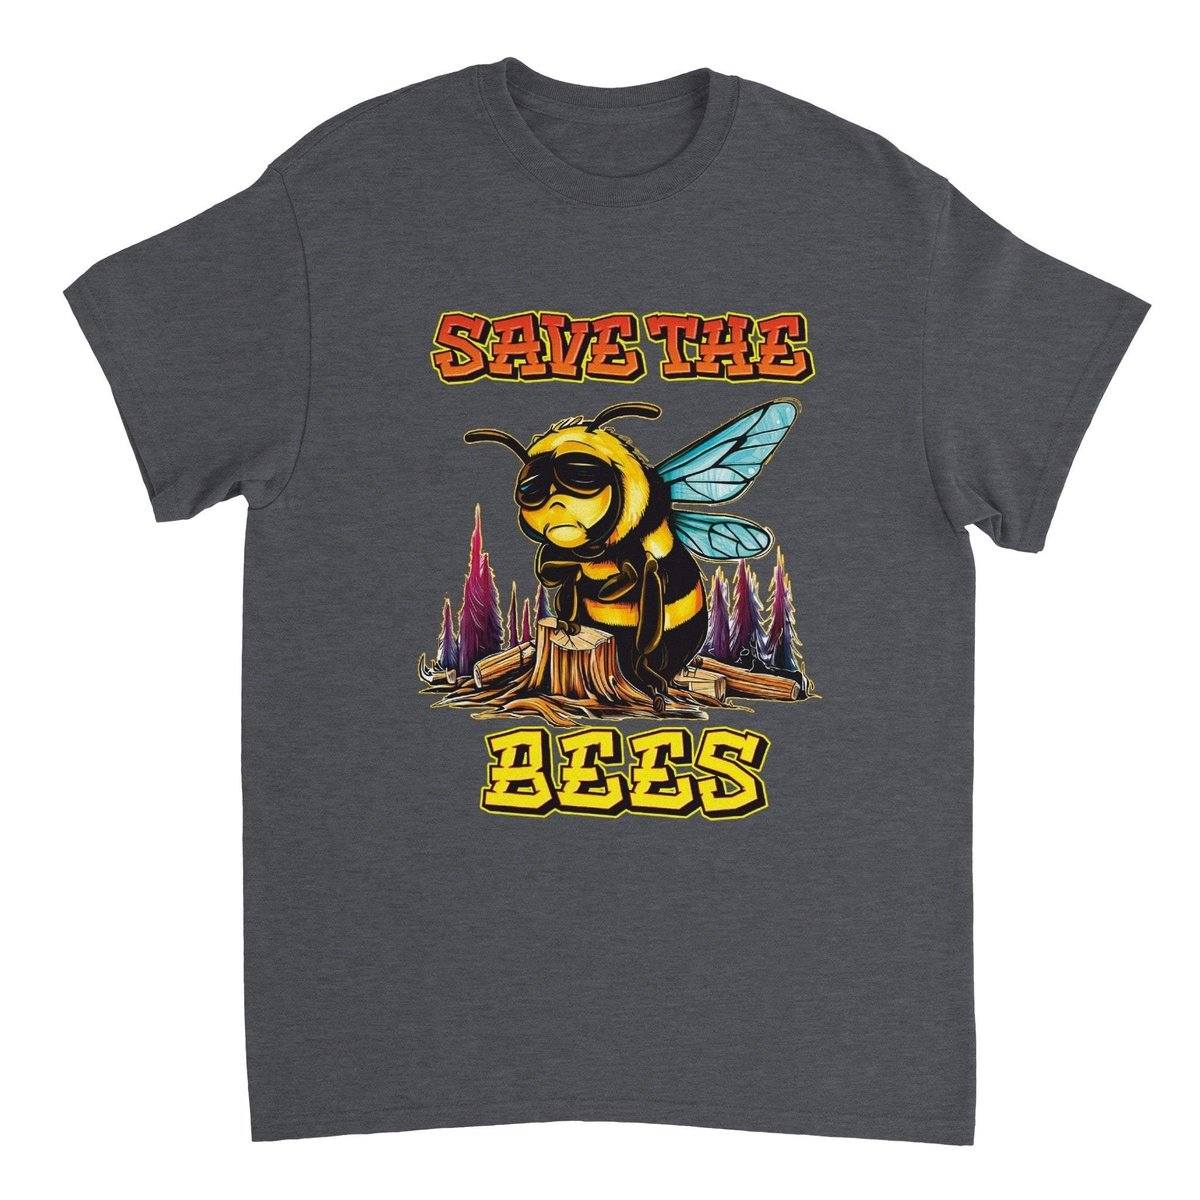 Save The Bees Tshirt - Crying Bee - Unisex Crewneck T-shirt Australia Online Color Dark Heather / S